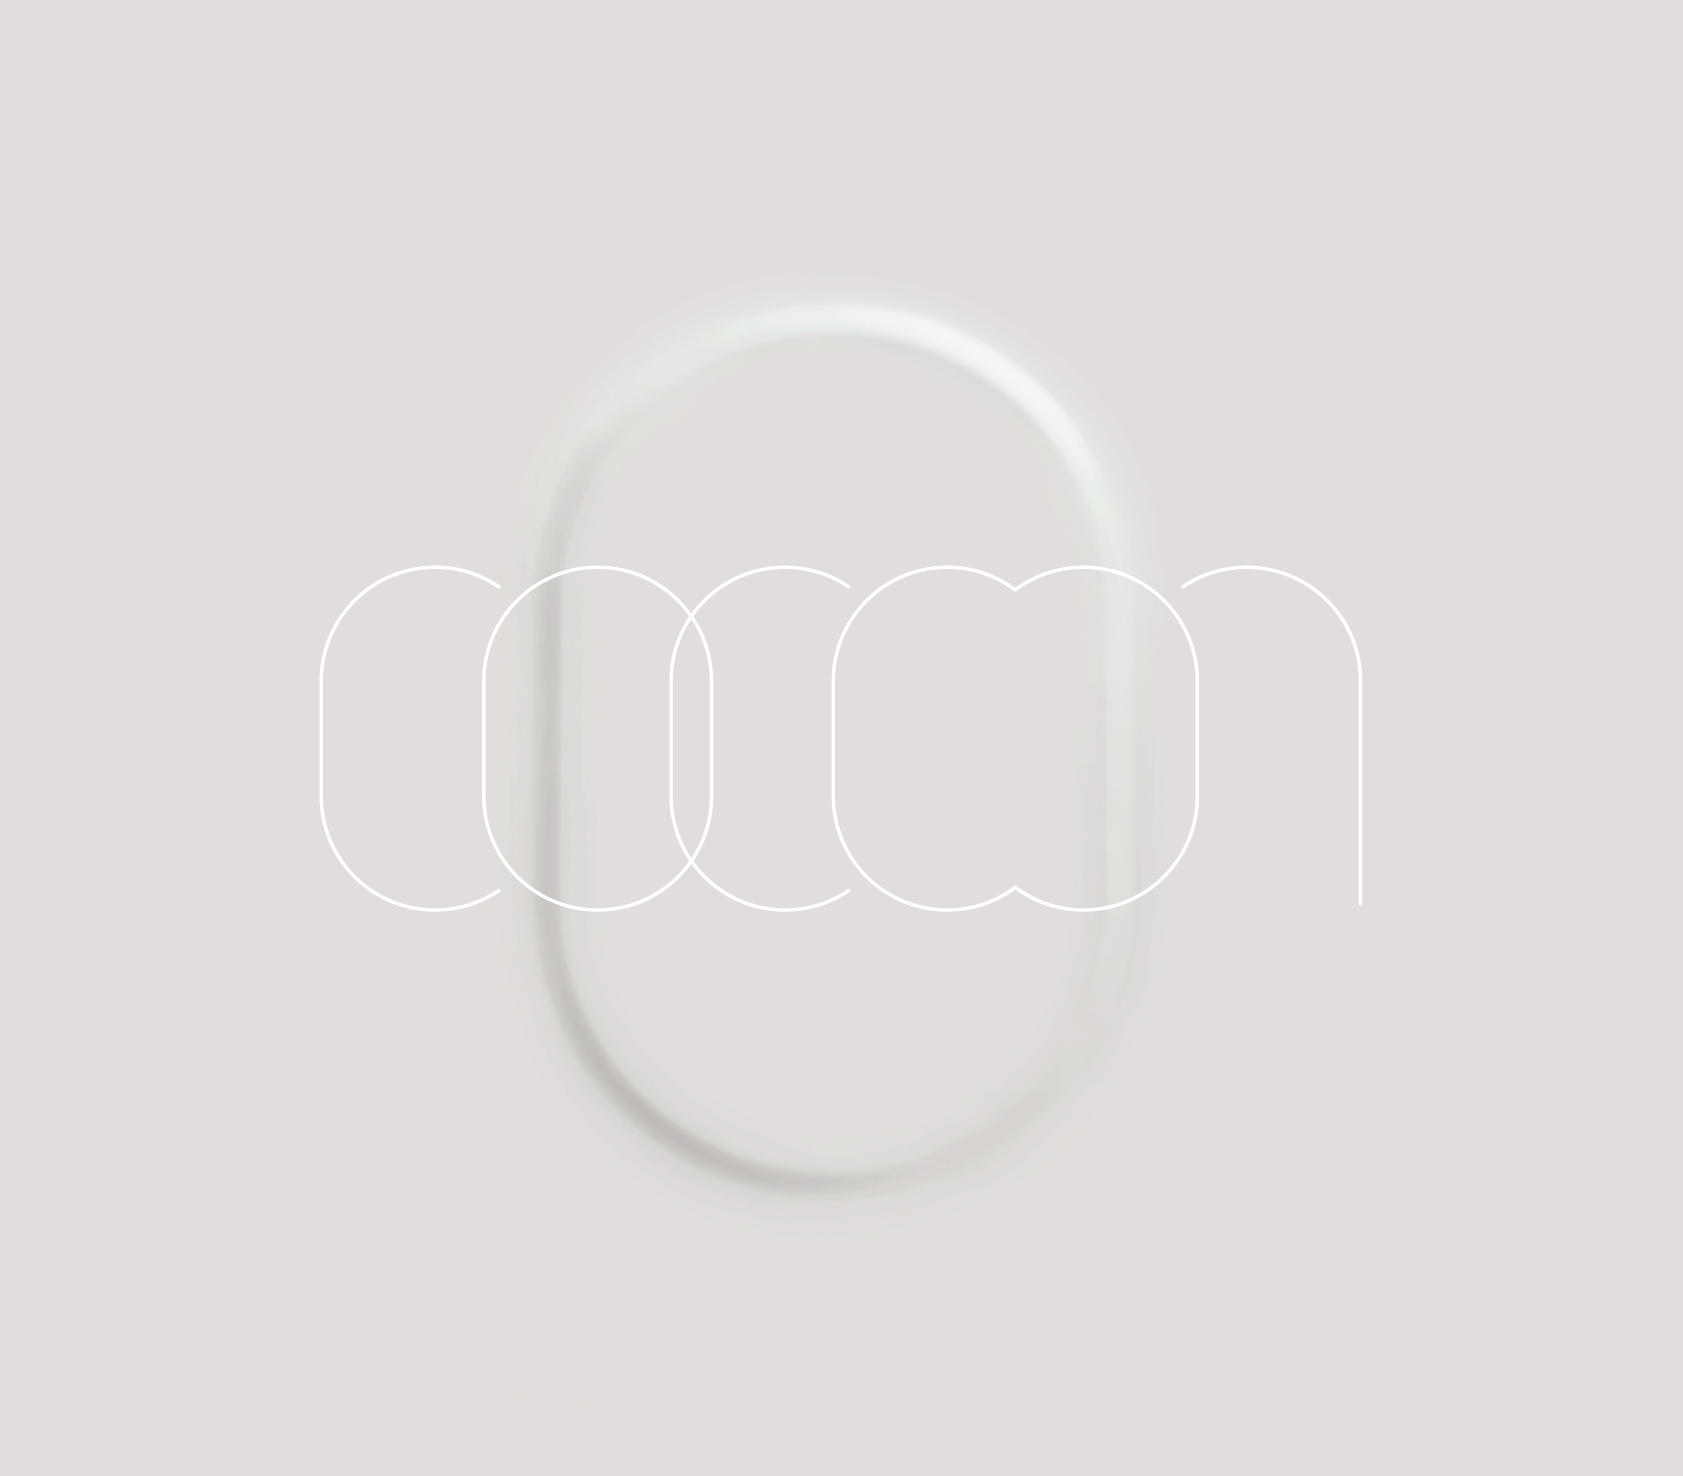 androp『cocoon』初回盤